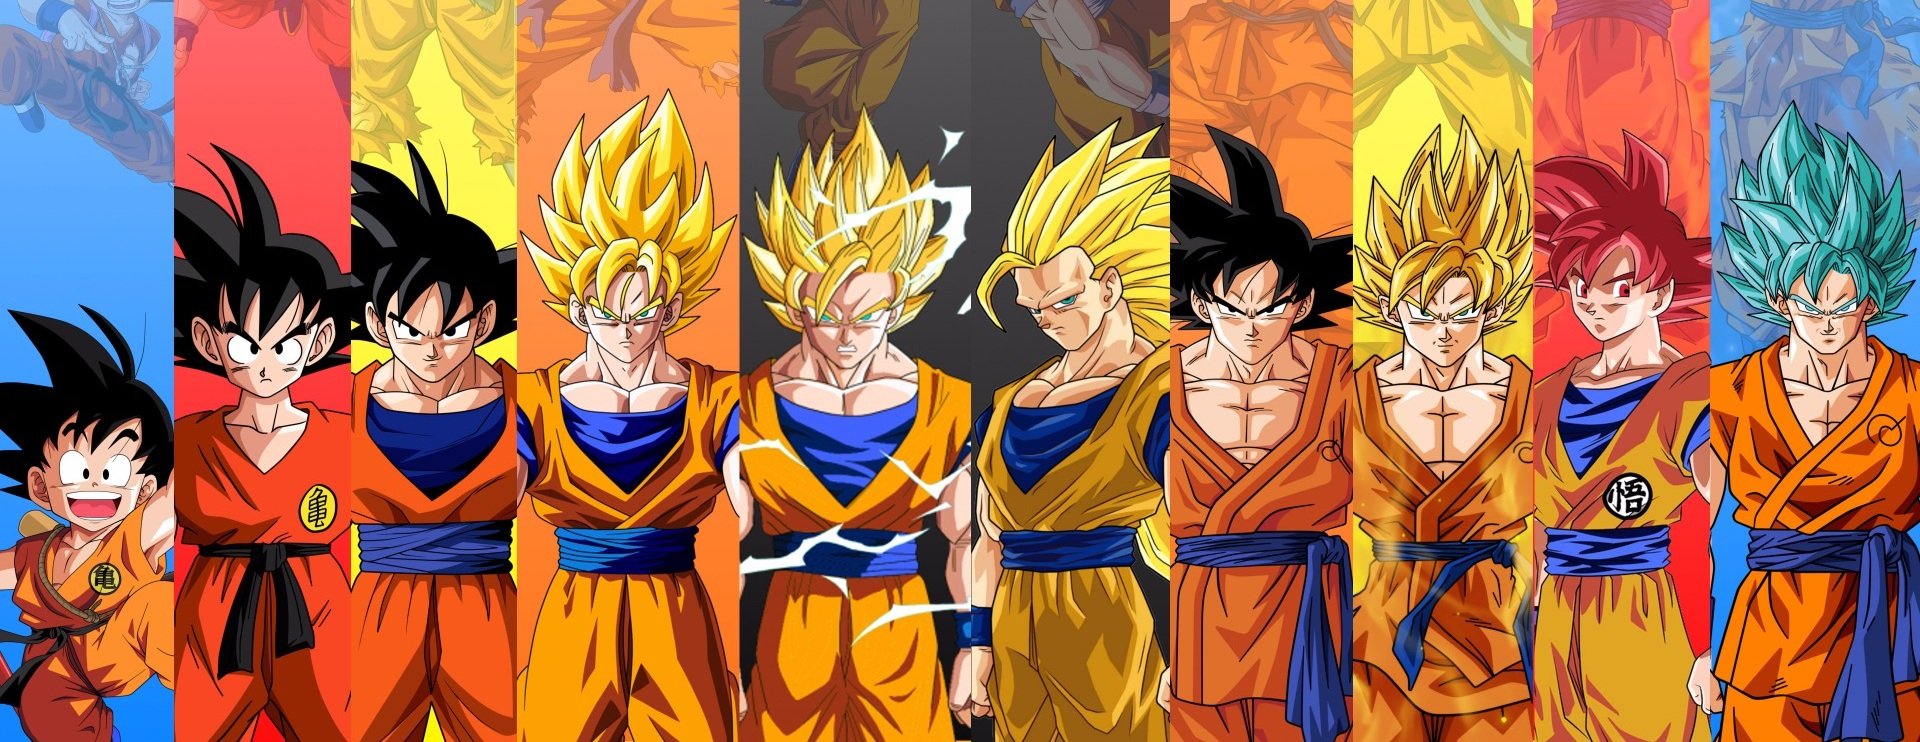 cindy kimbell recommends all of gokus super saiyan forms pic